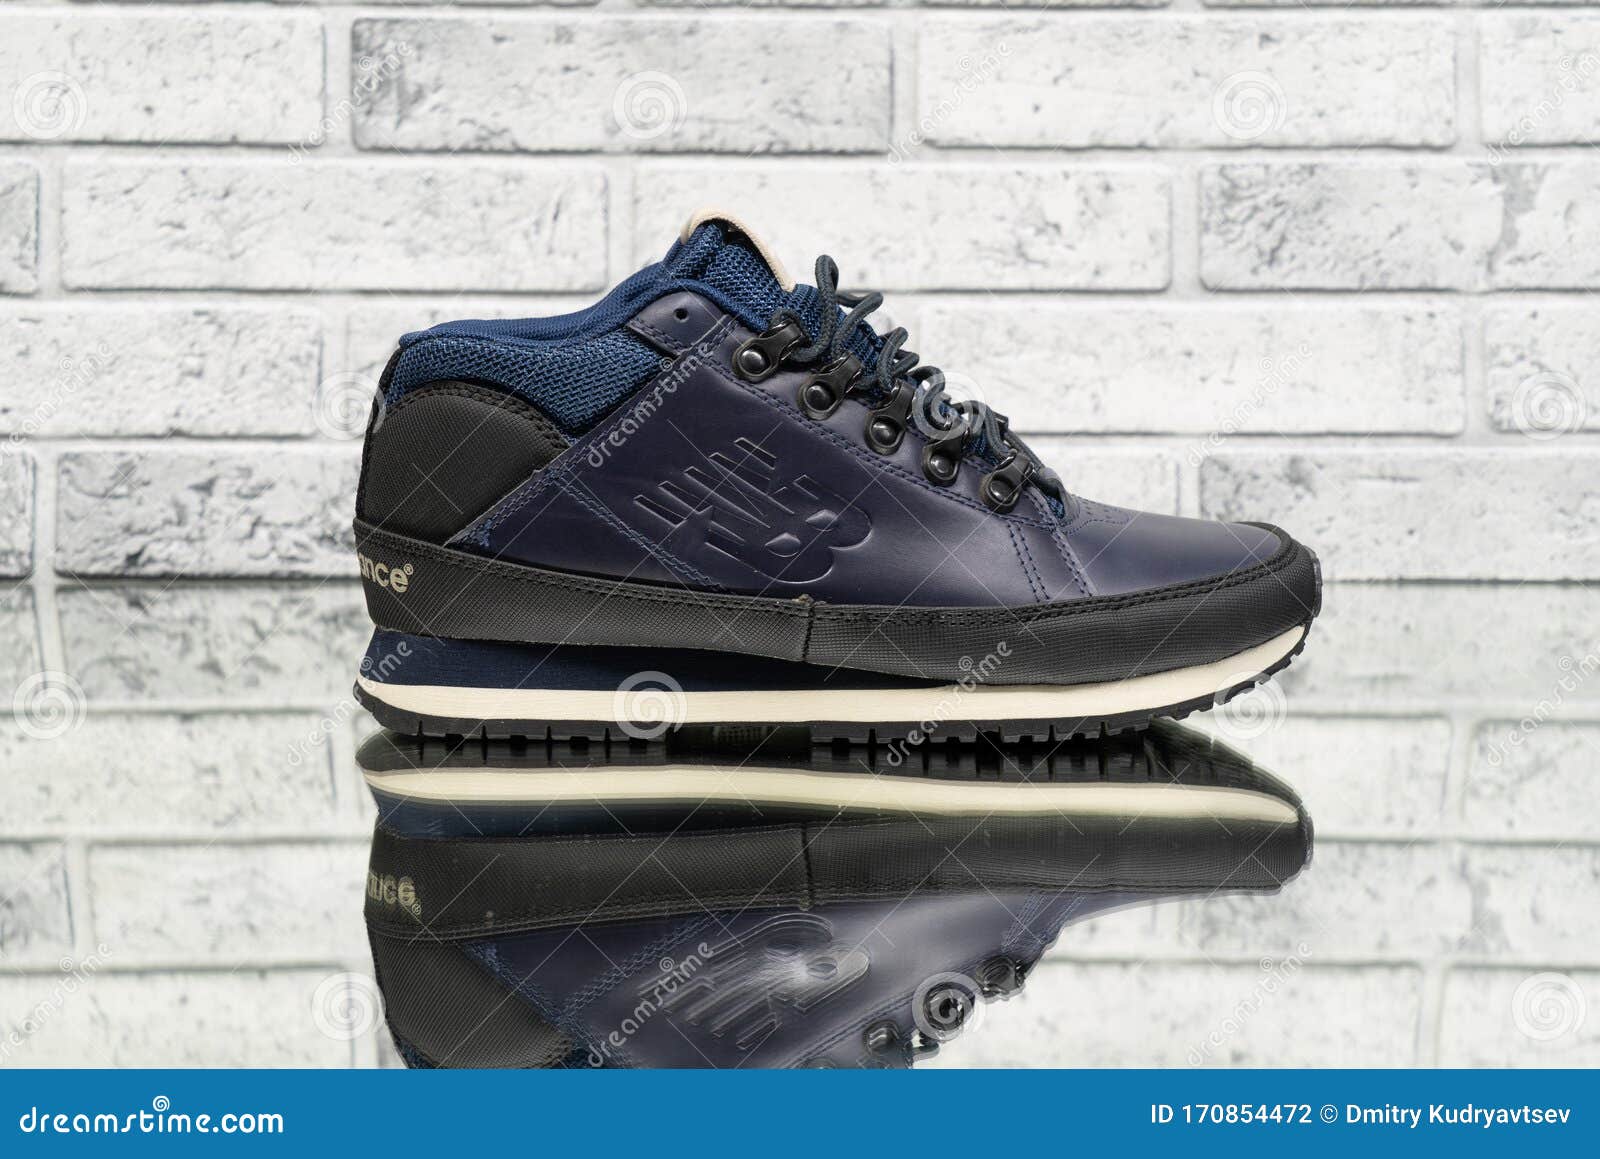 New Balance 754 Fur Leather Dark Navy Sneakers. Editorial Photography -  Image of clothes, balenciaga: 170854472